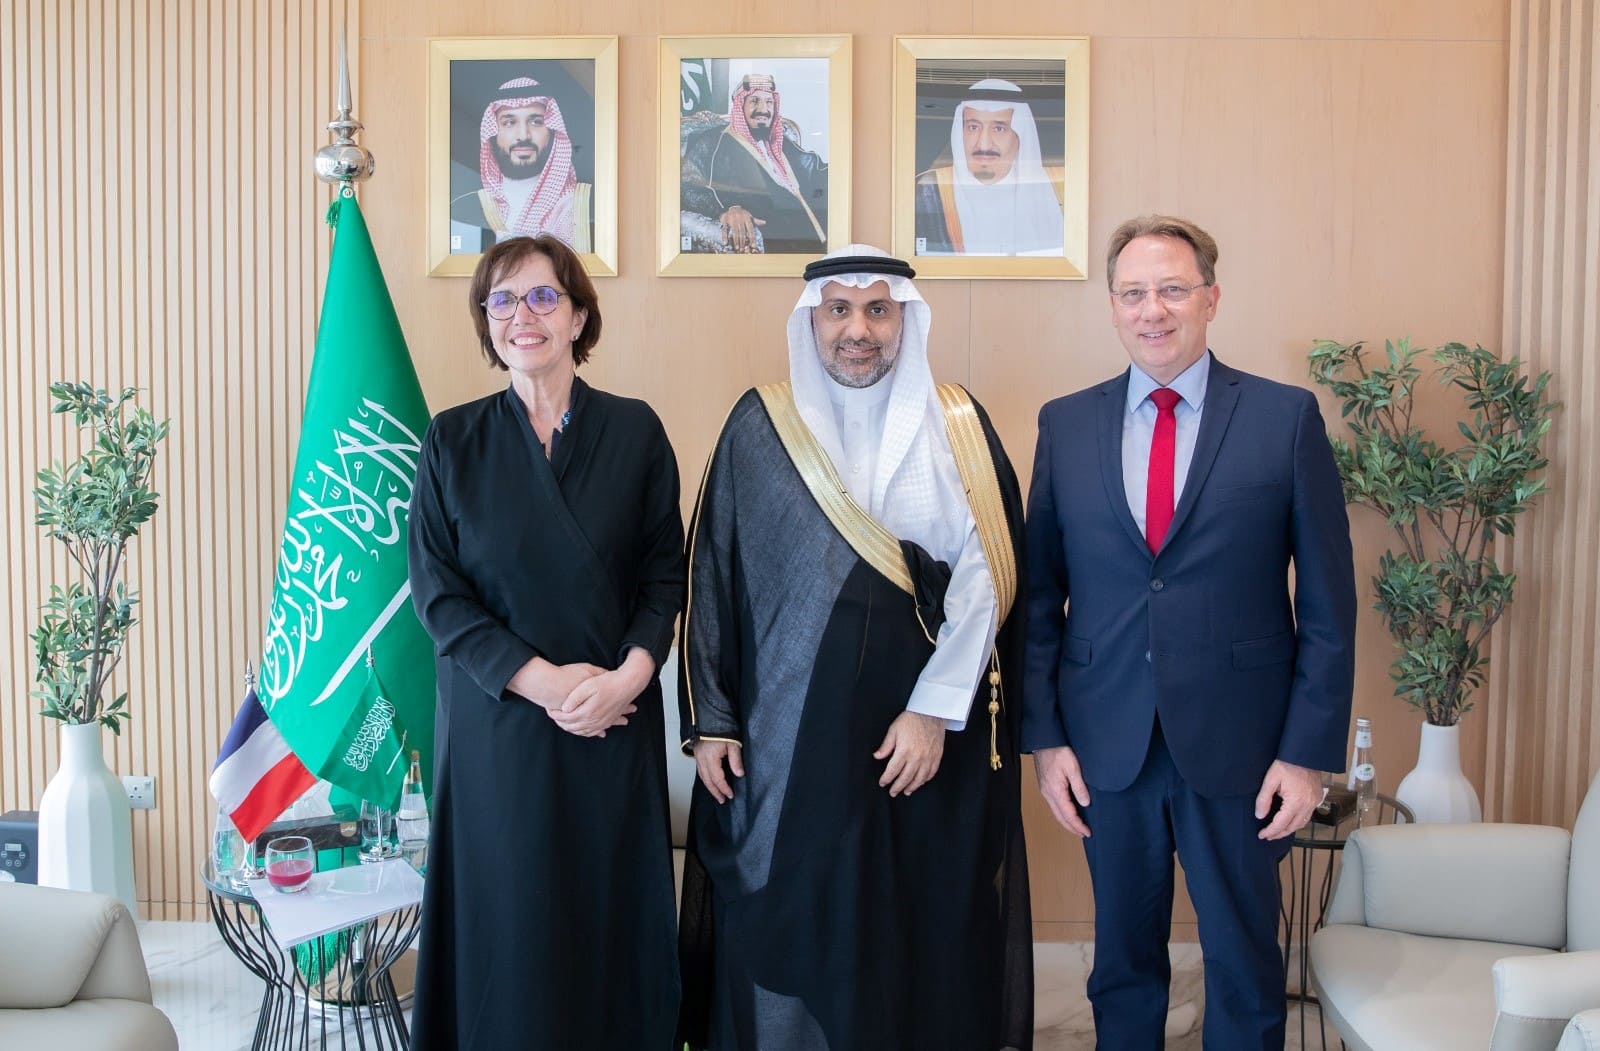 Minister Of Health Meets with the Candidate for the Position of Director-General of The World Organization for Animal Health